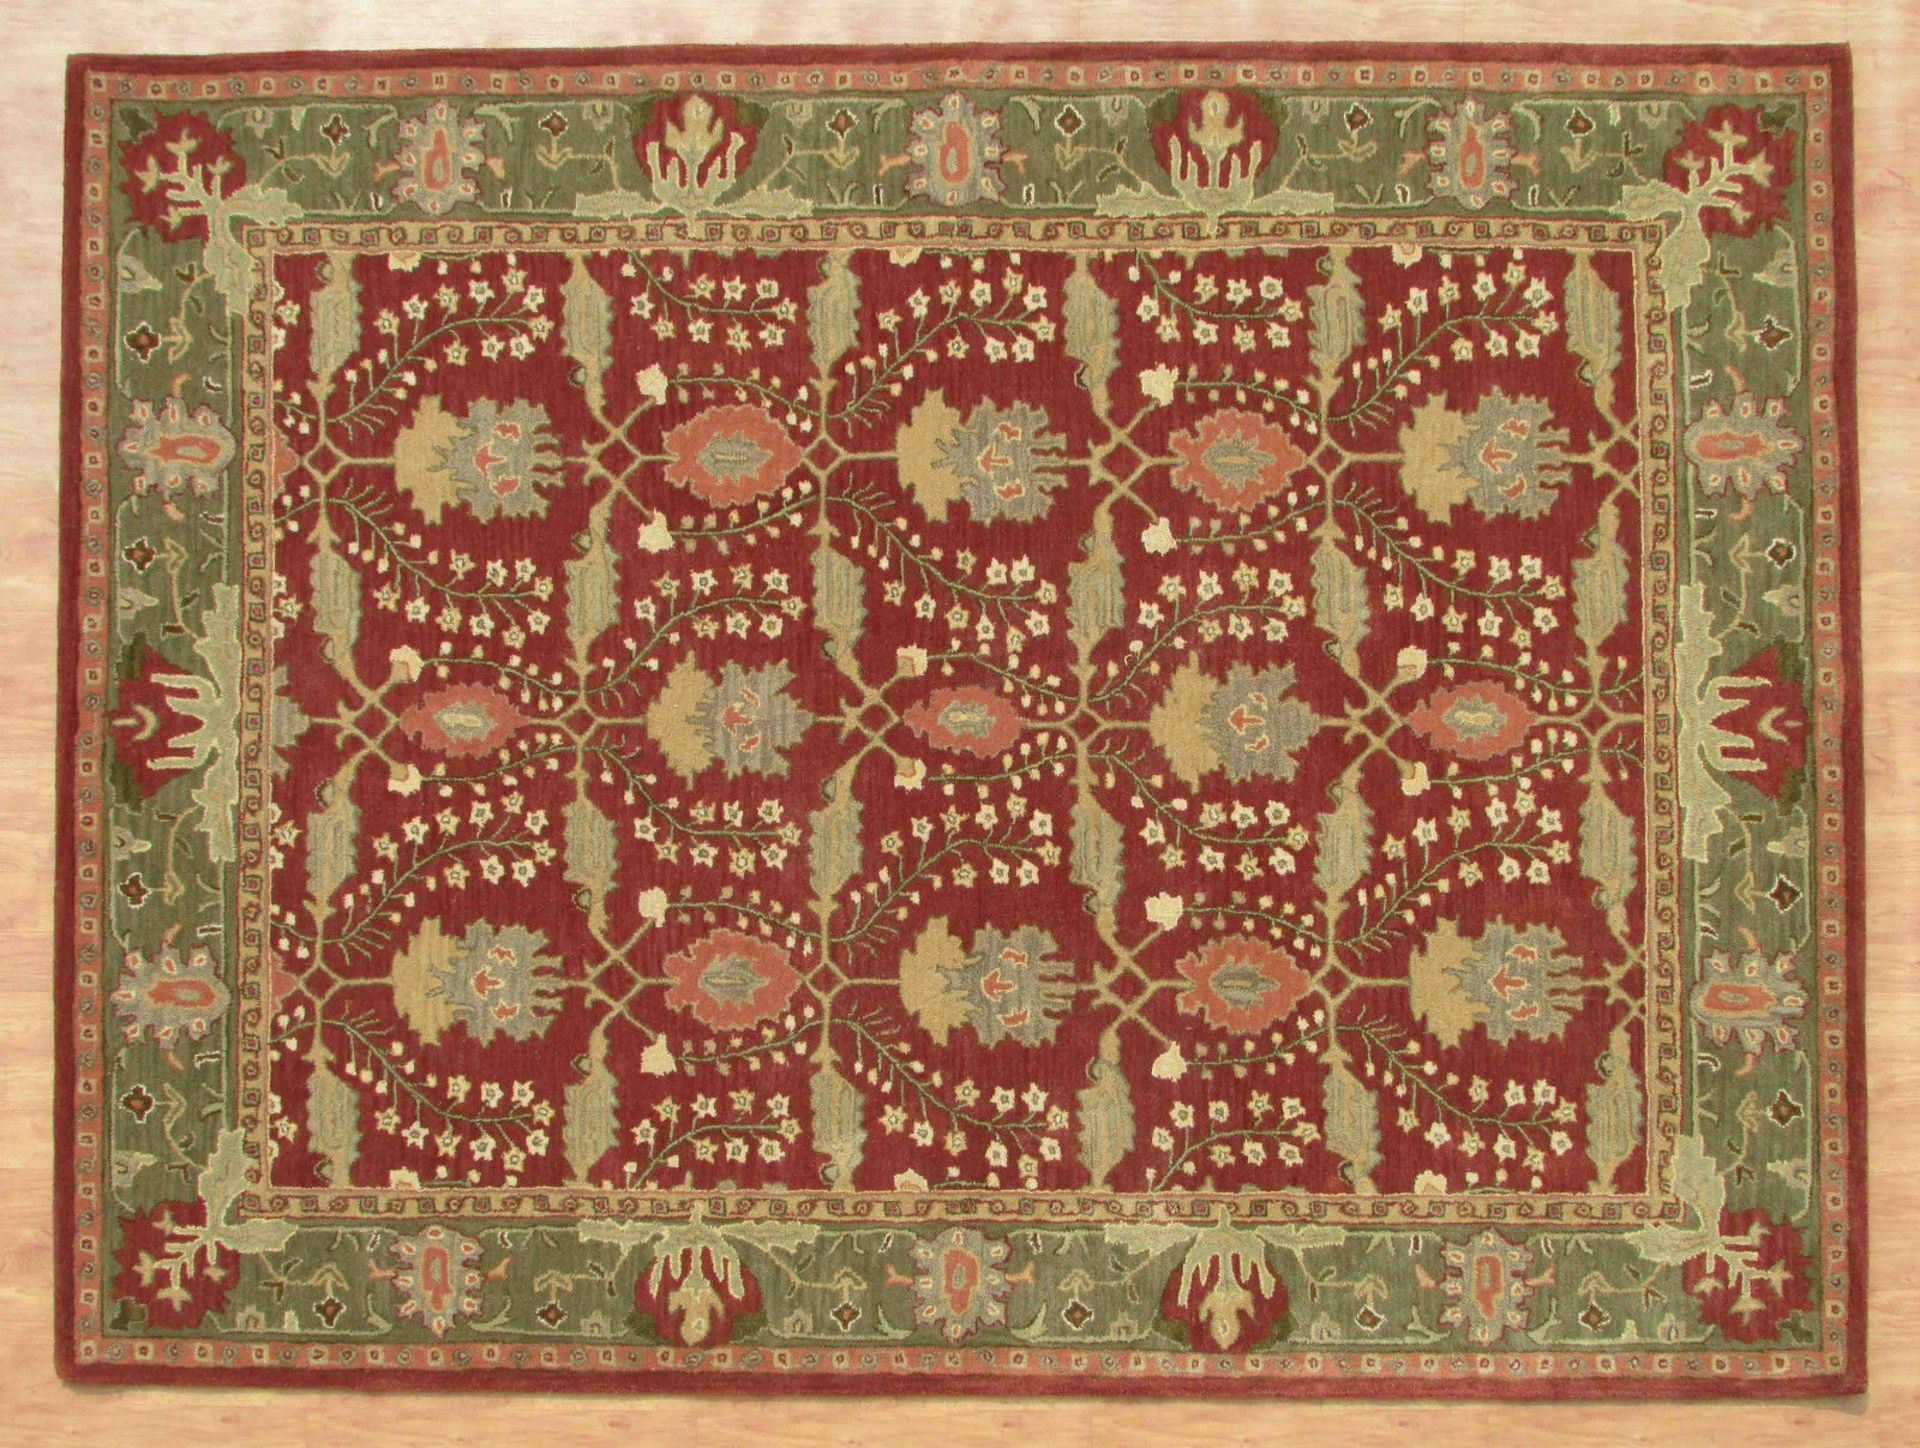 Traditional Persian area rug a stunning repeating pattern 100% wool hand tufted rug vibrant in